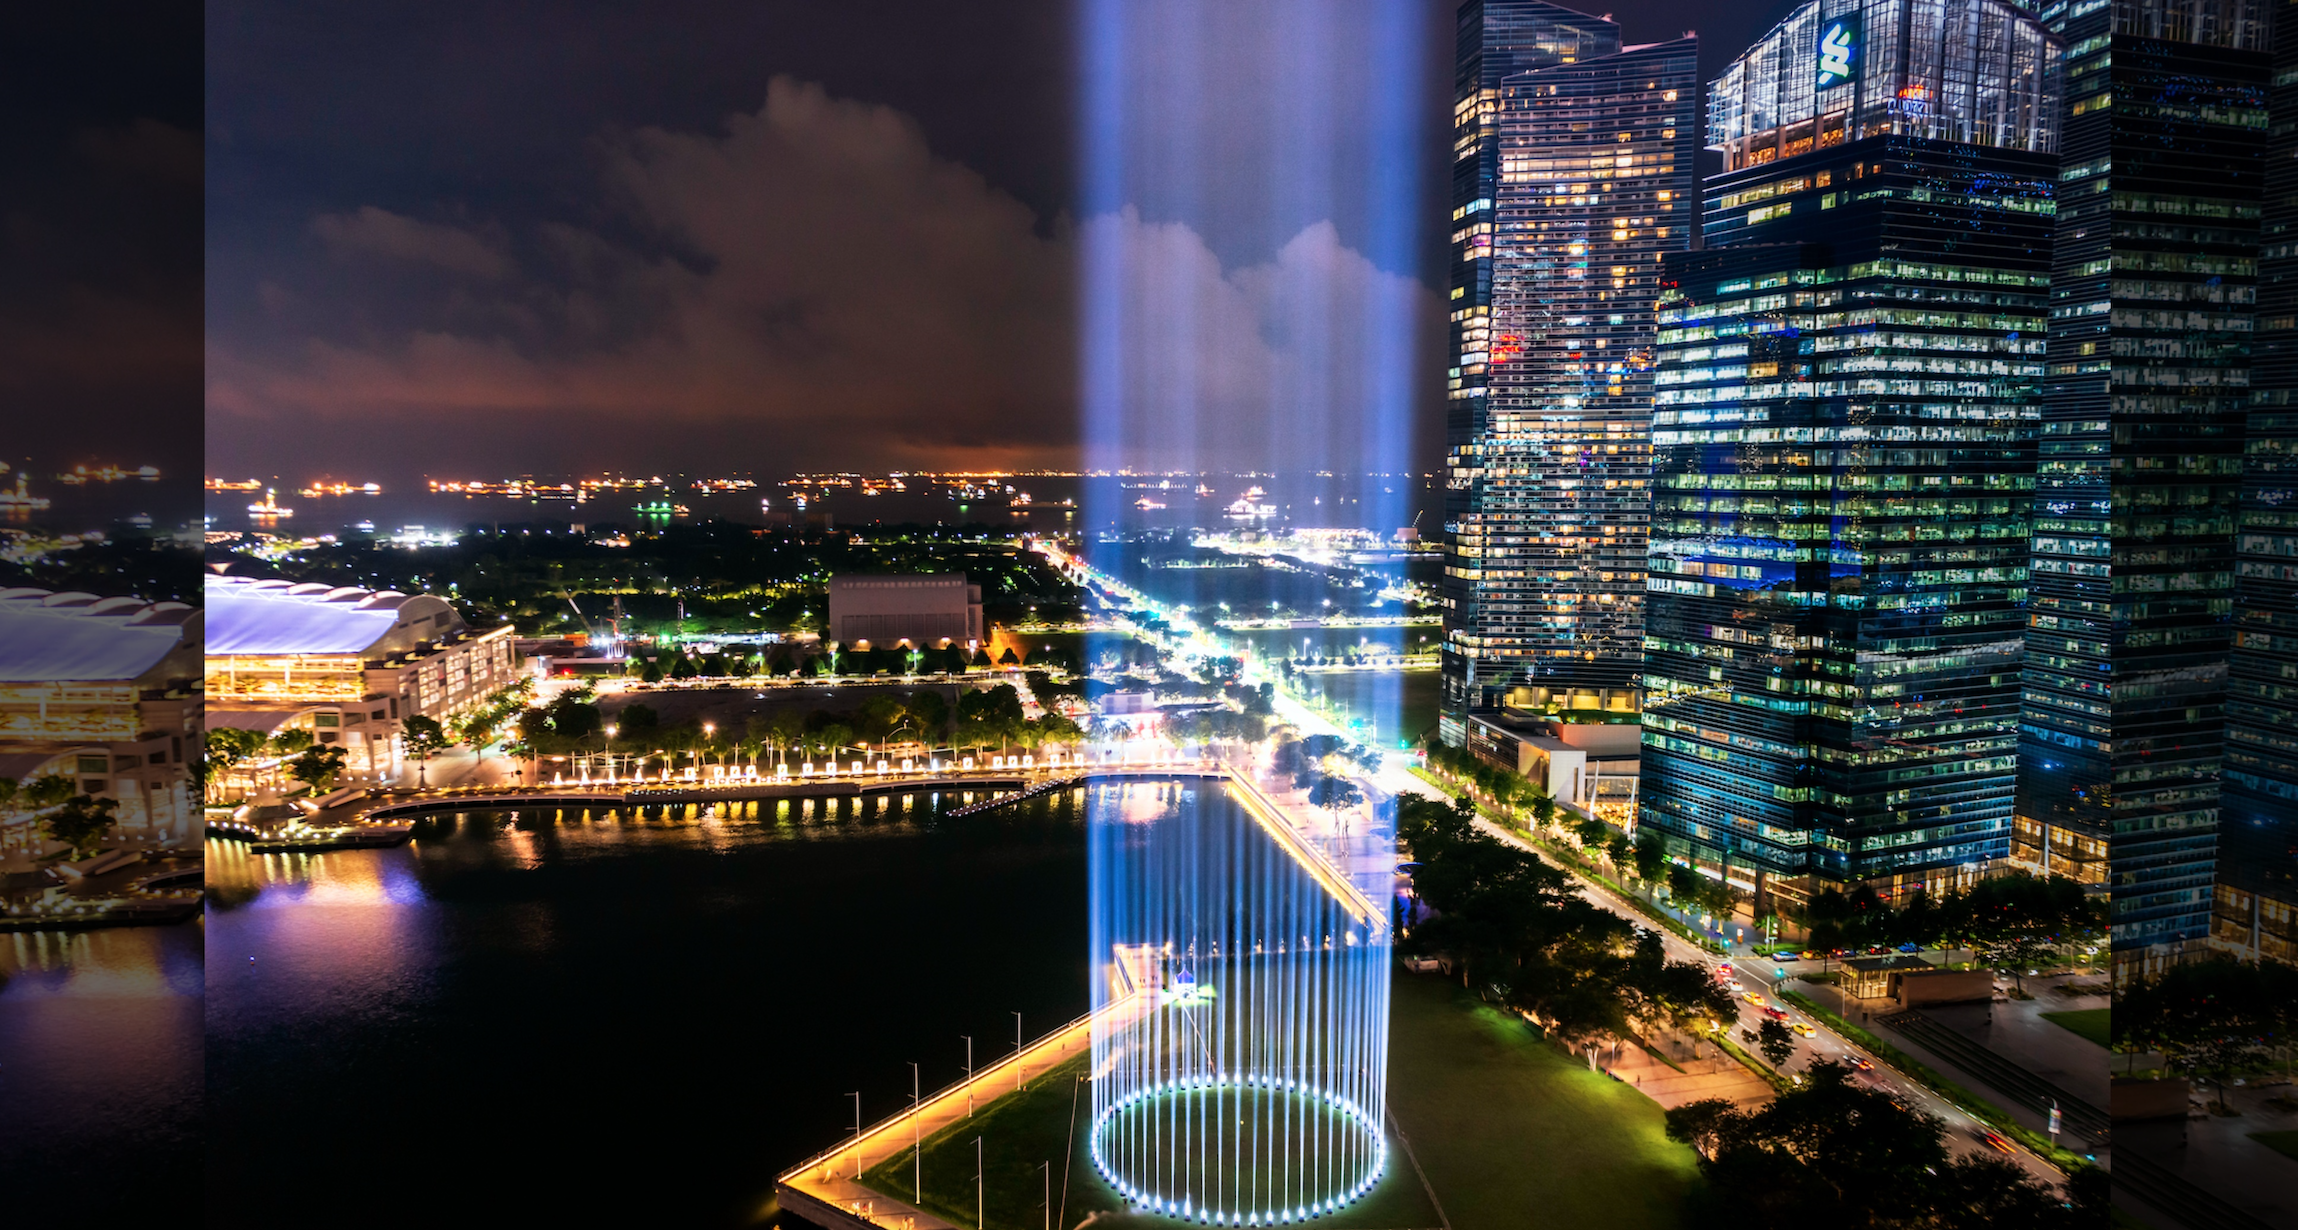 Nightly light of 60 beams projected towards sky at Marina Bay for Dec. 2020 - Mothership.SG - News from Singapore, Asia and around the world